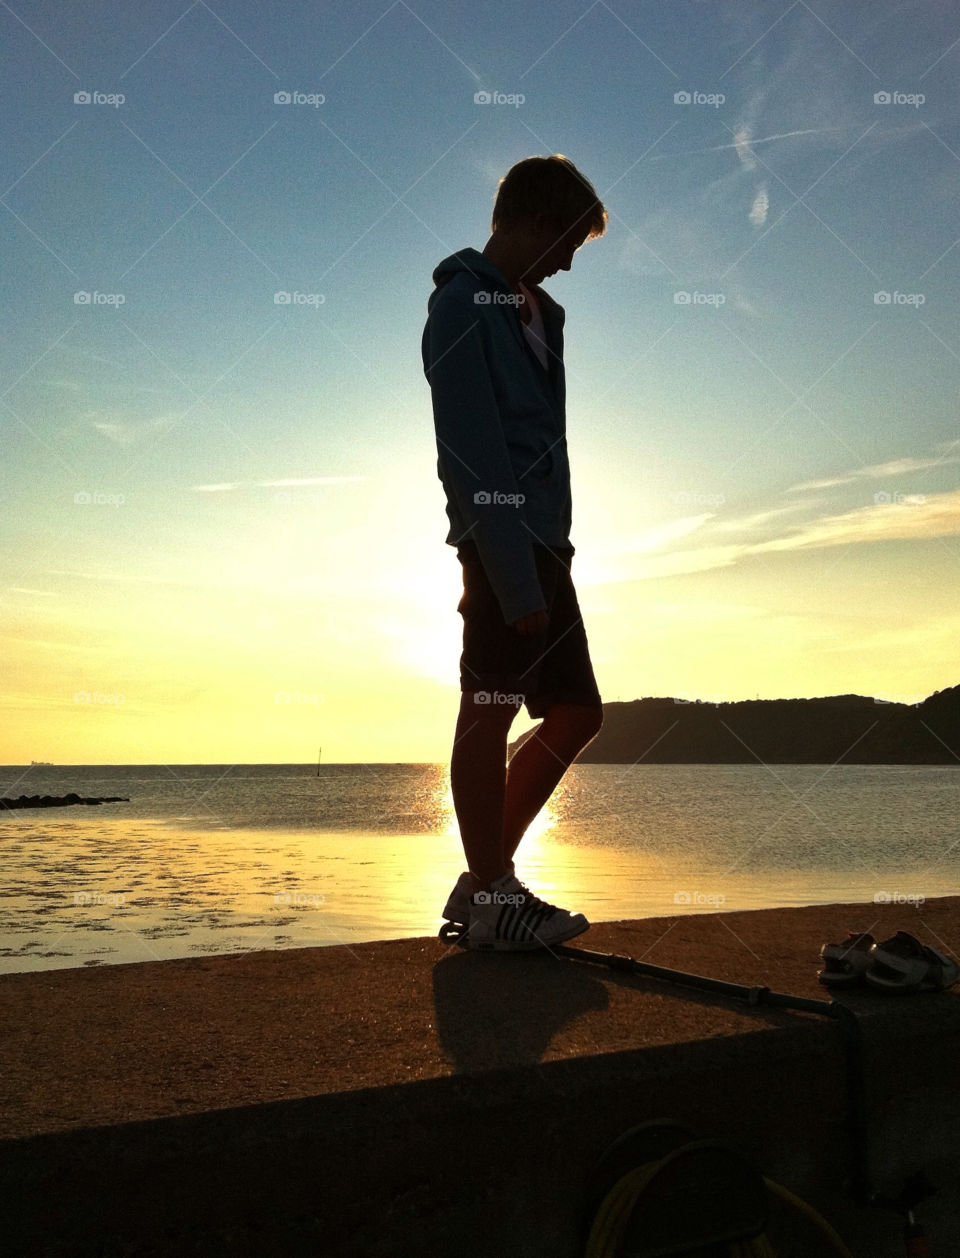 mölle sweden young sunset boy by chattis